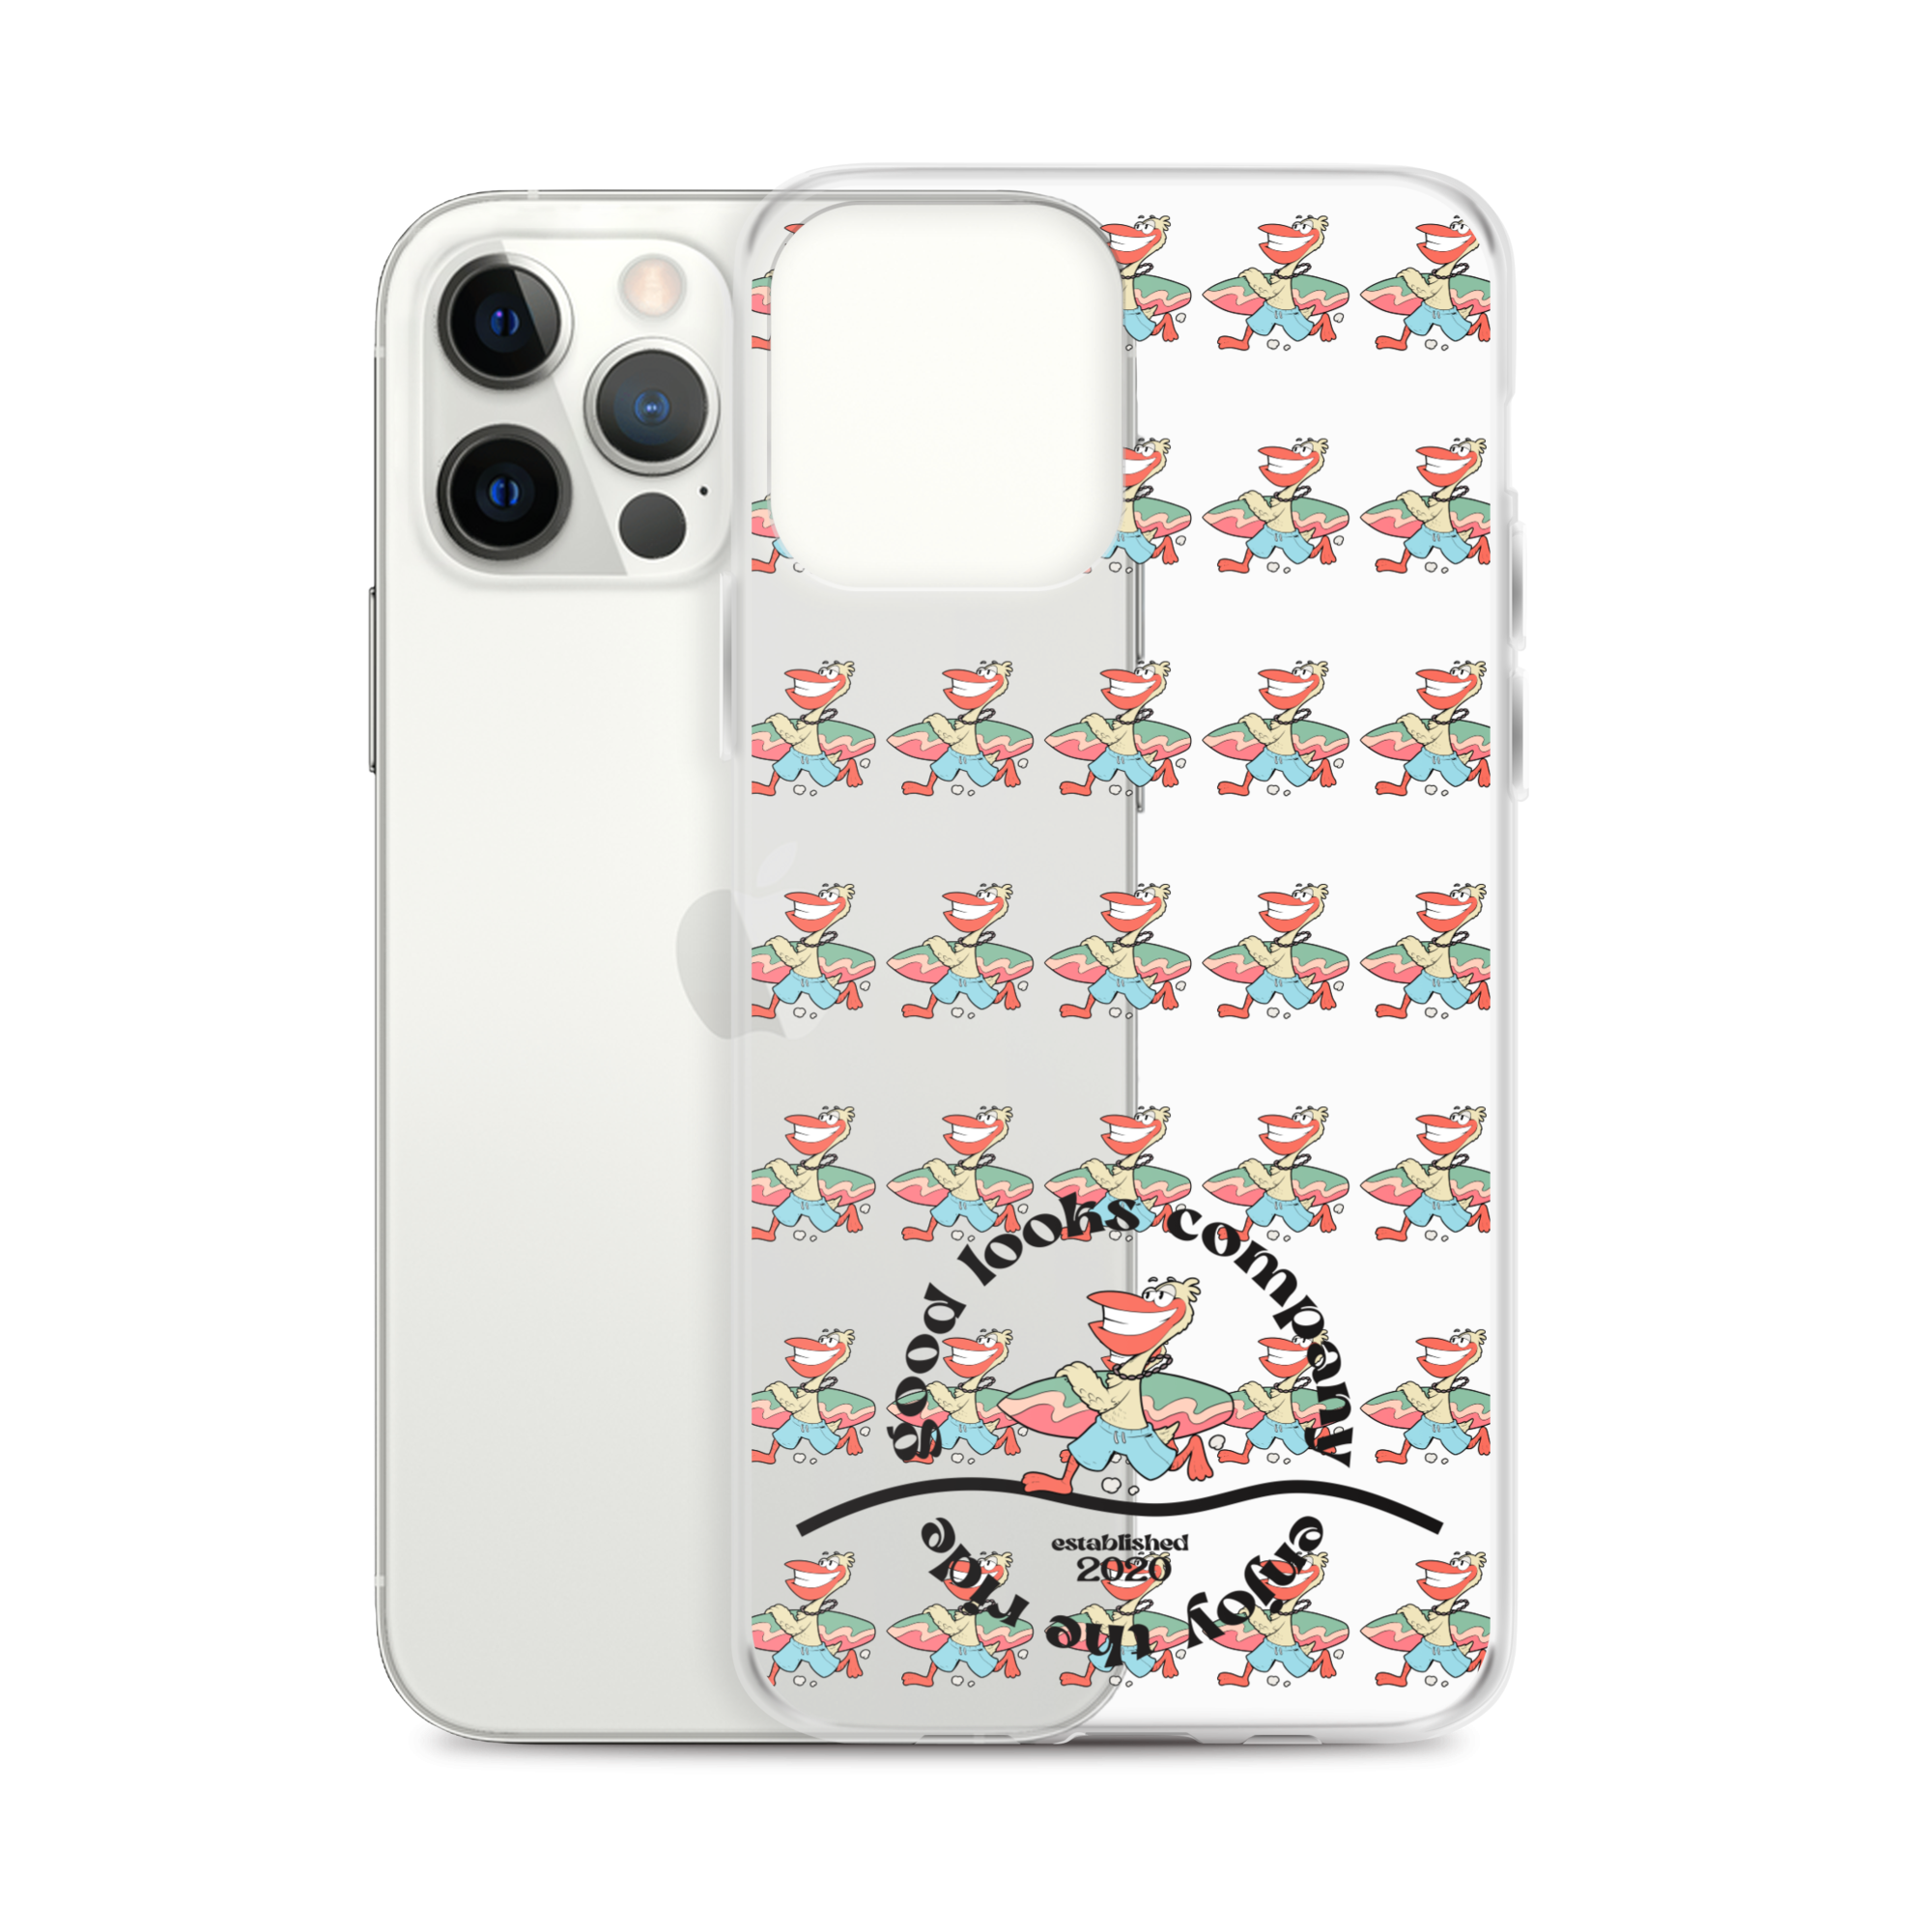 The Pelly iPhone Case